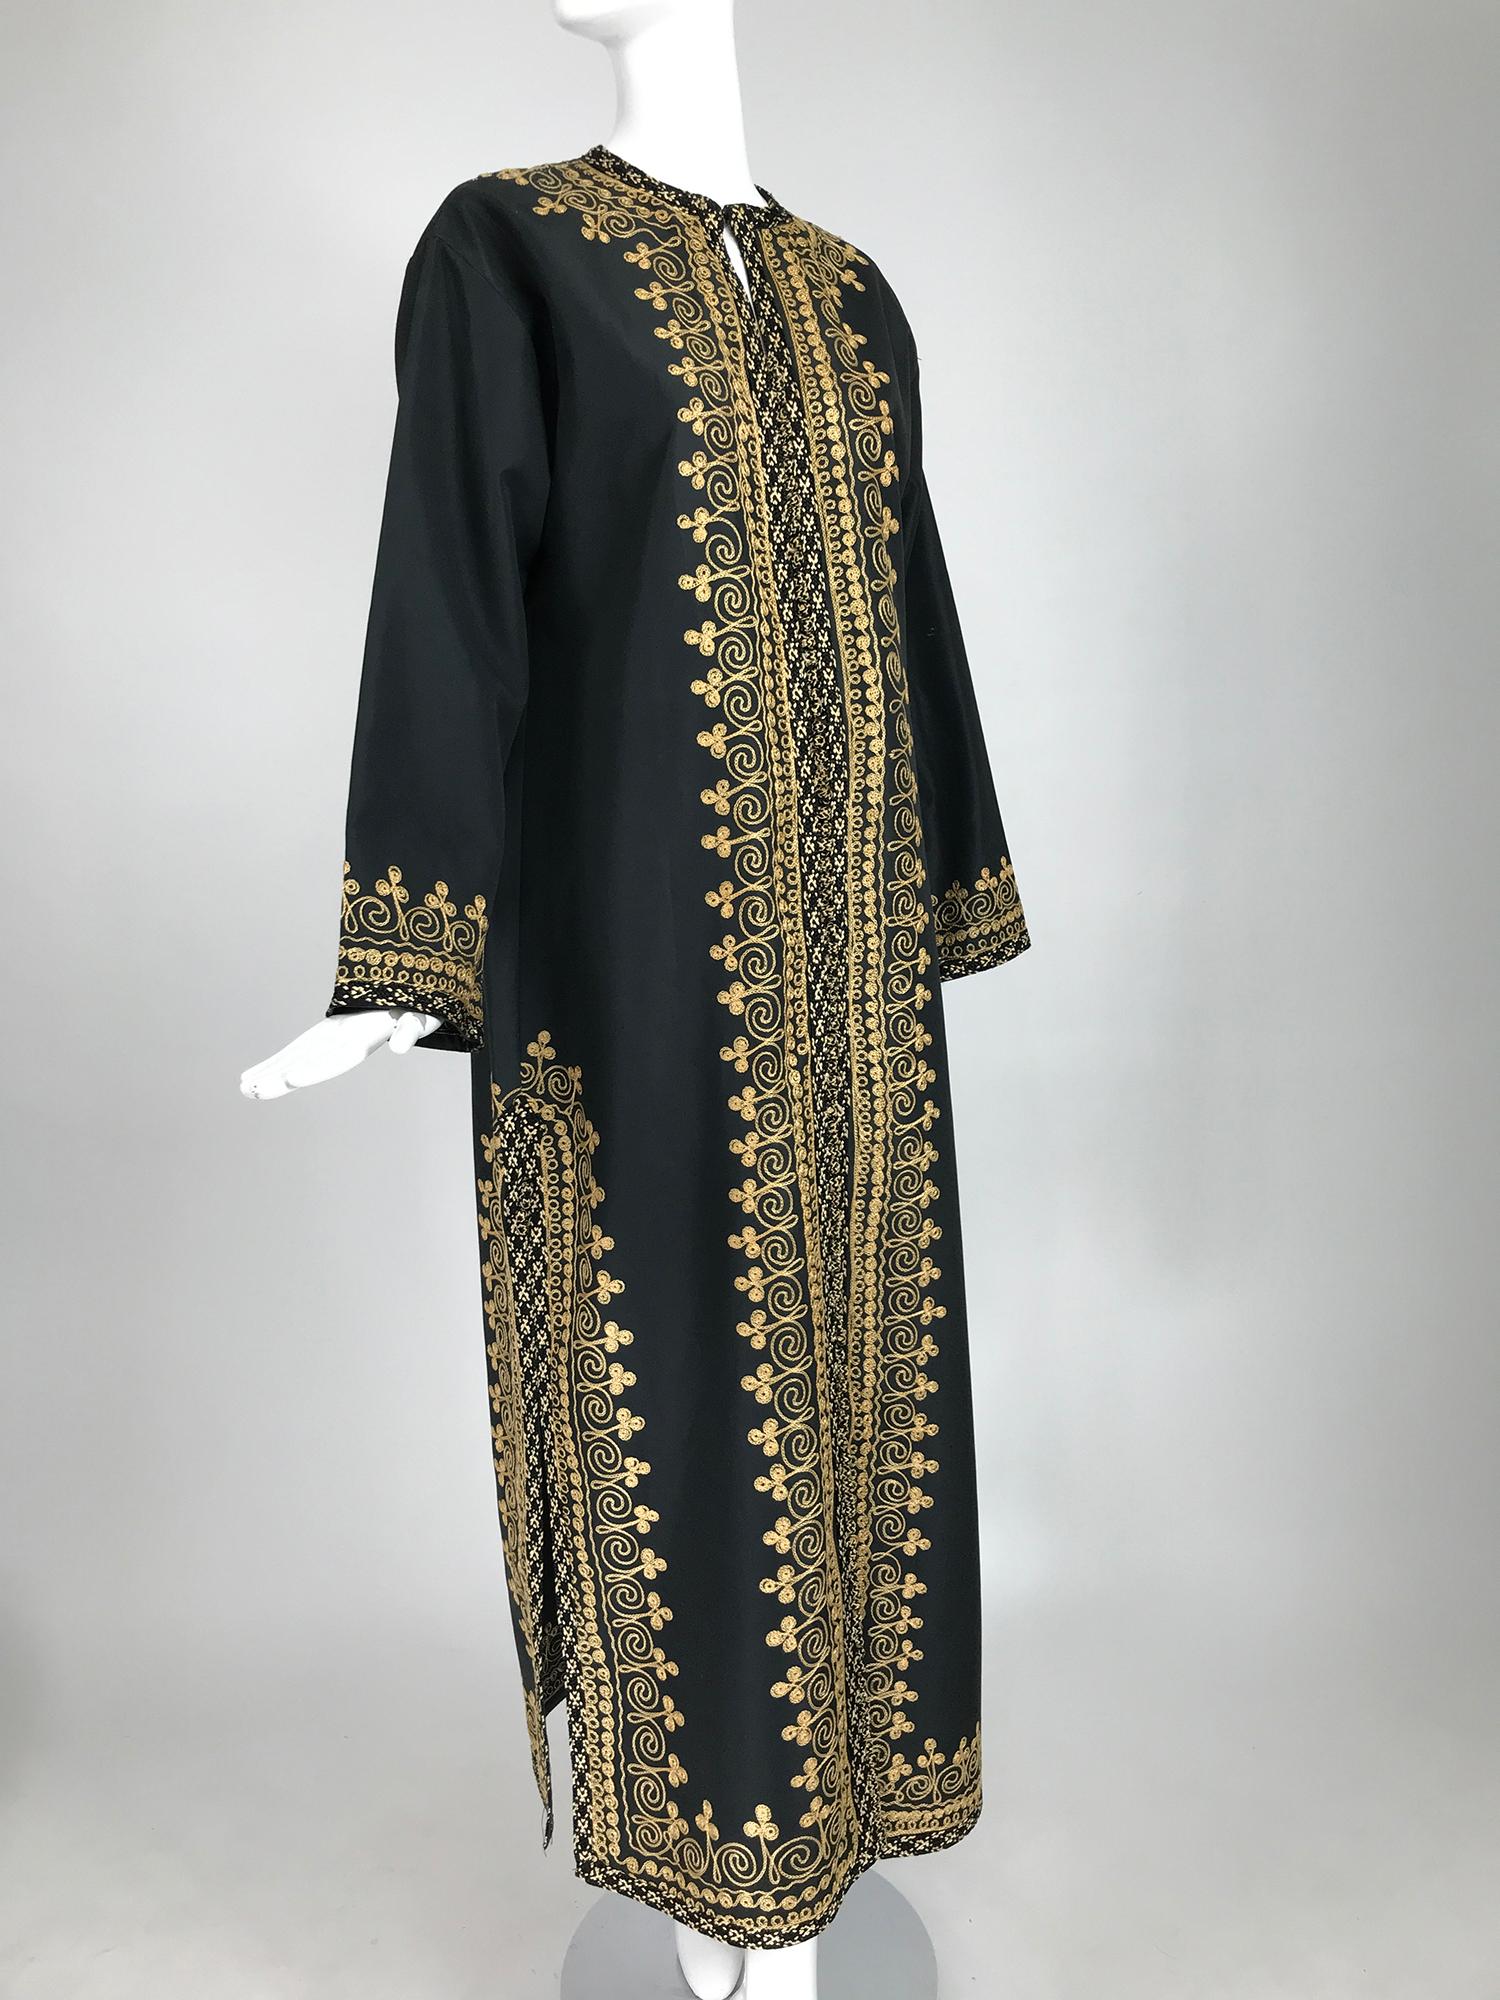 1960s black embroidered caftan with black & tan woven raffia trim. An unusual caftan with a bold design woven of black & tan raffia. Long sleeve caftan has a hidden zipper closure at the front. A line full shape. Fits size medium. 
     In excellent